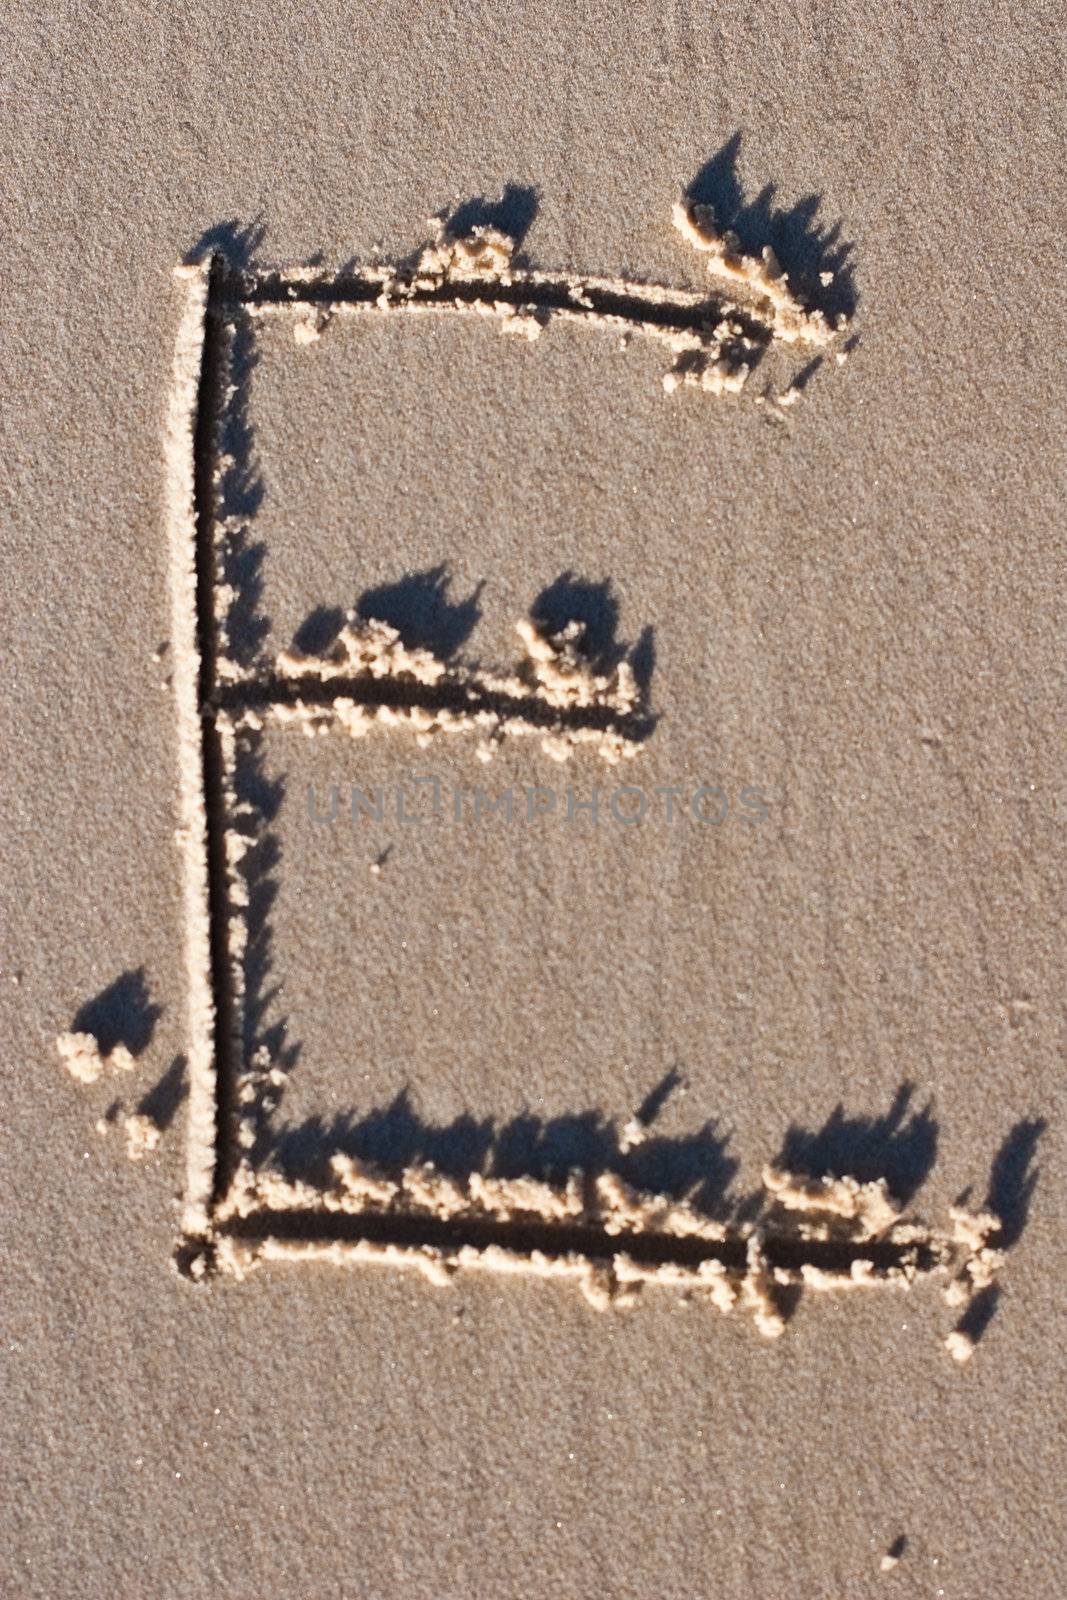 Letter E drawn in the Sand